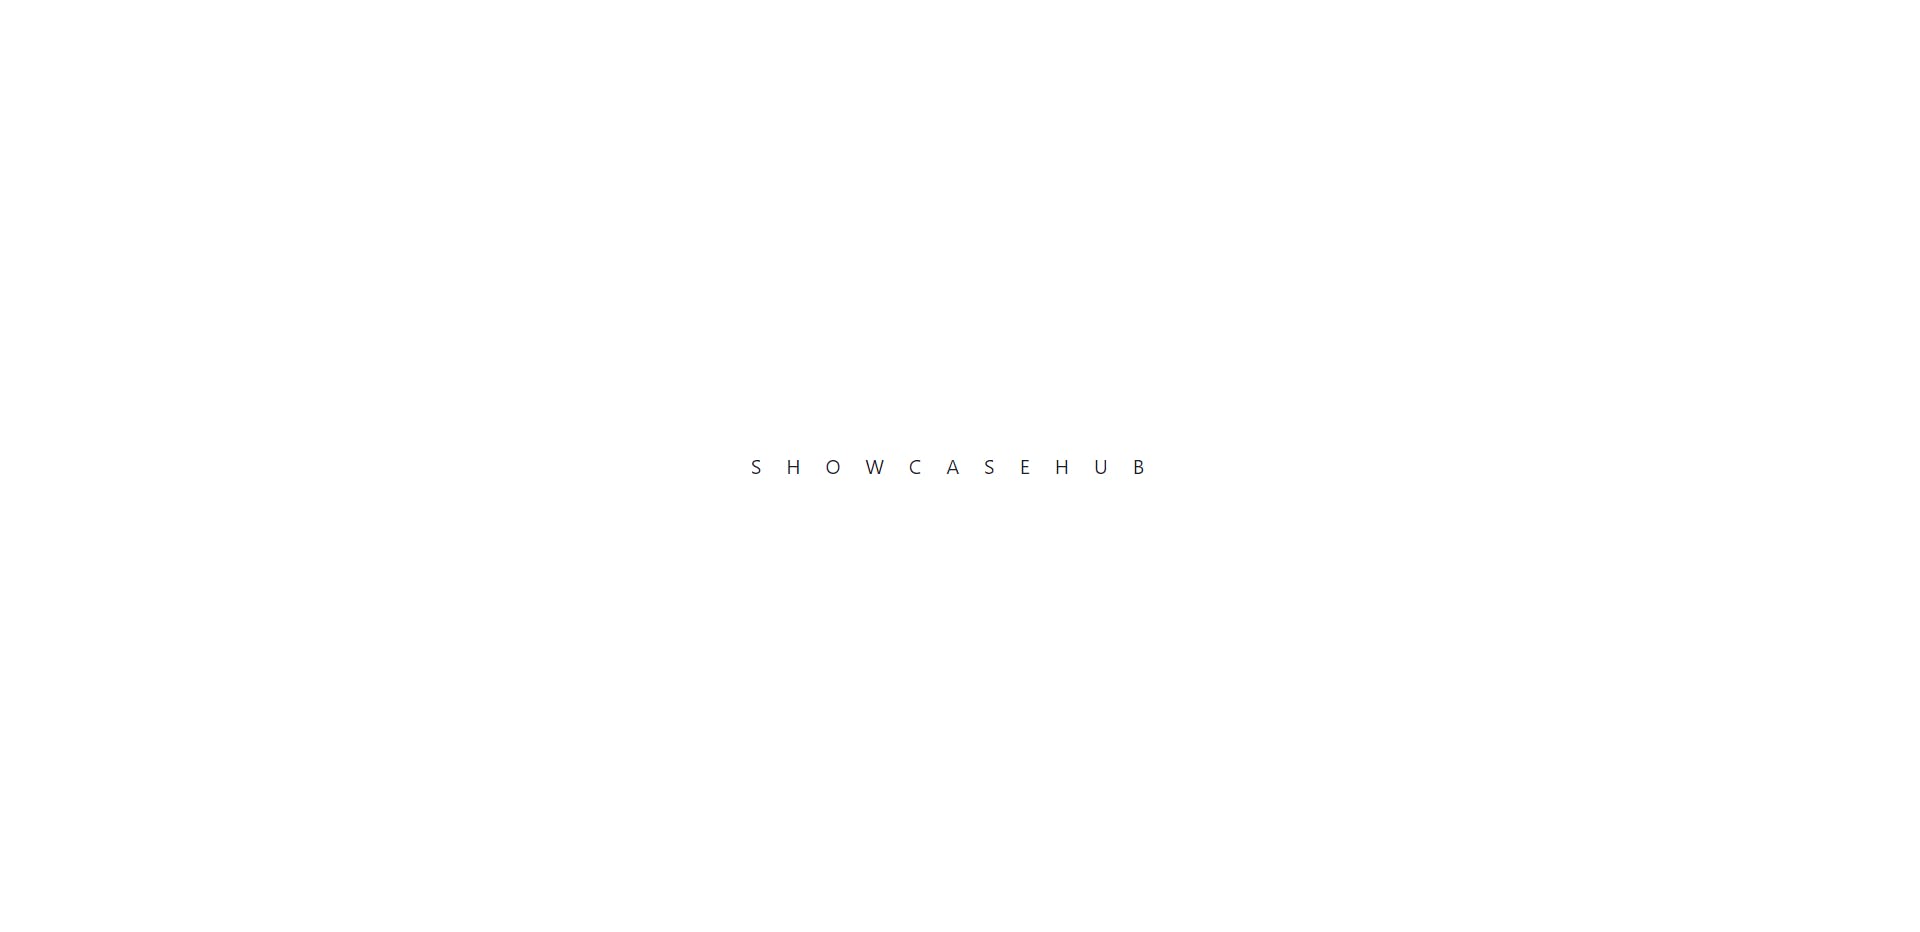 ShowCaseHub - A place to showcase your projects - SideProjectors ...